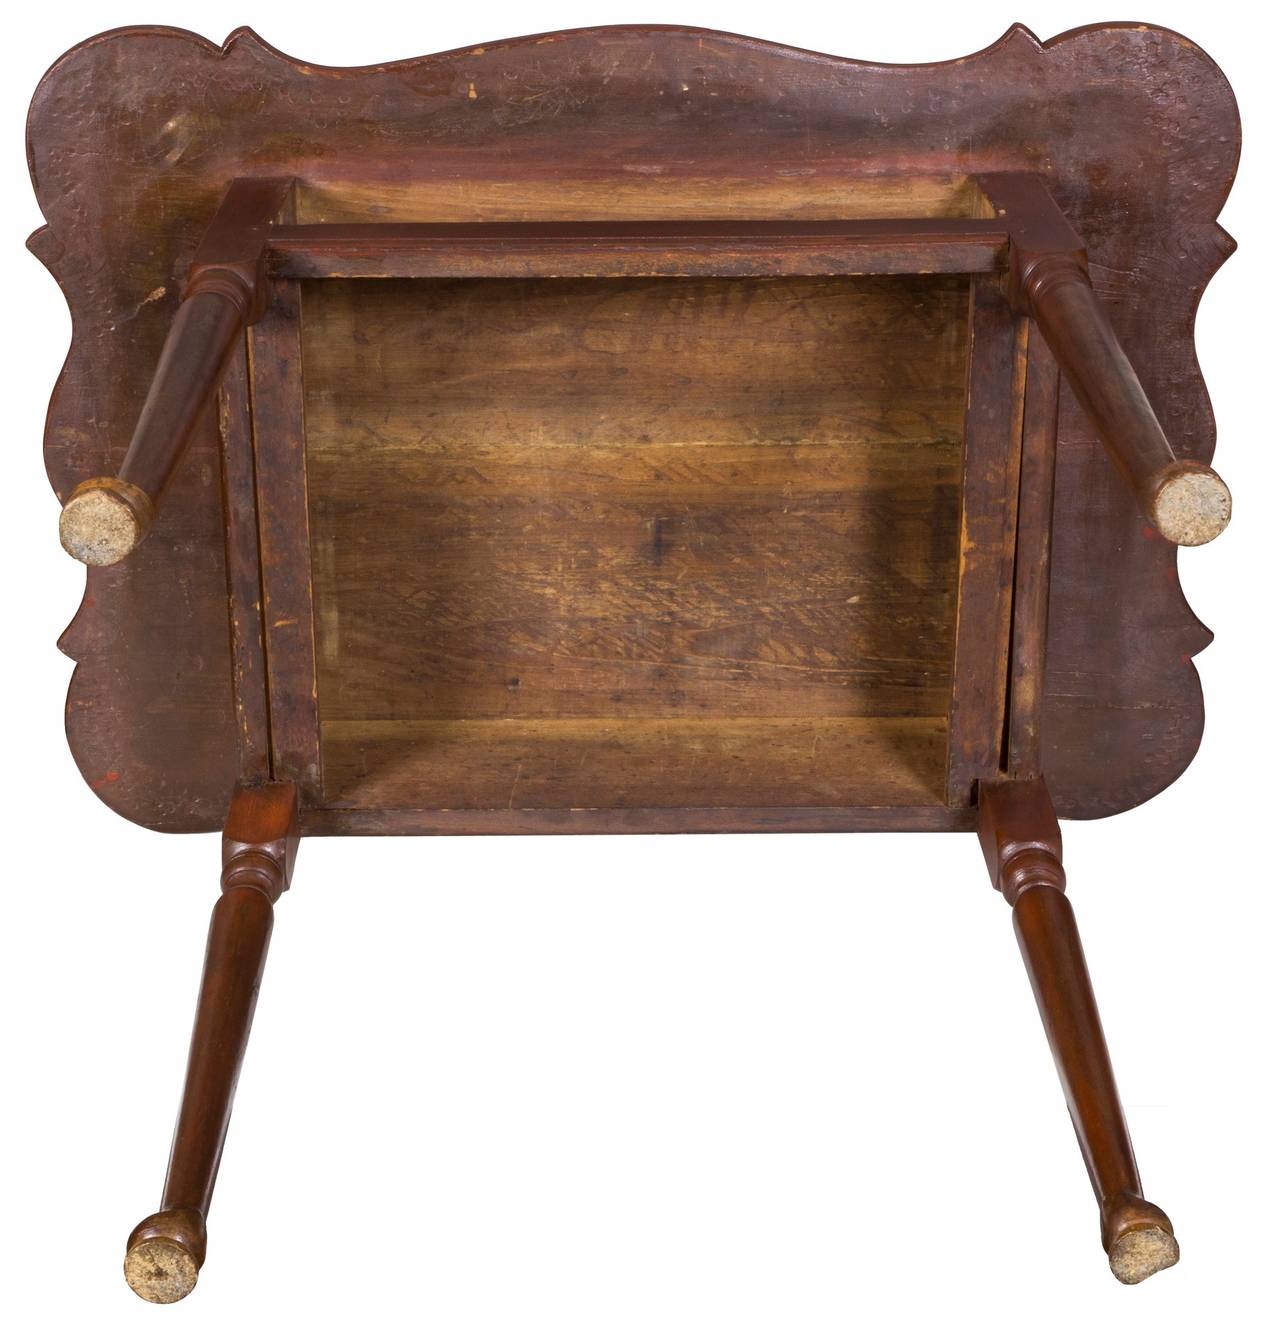 Rare Porringer Top Queen Anne Side Table with Single Drawer, circa 1750-1760 For Sale 1